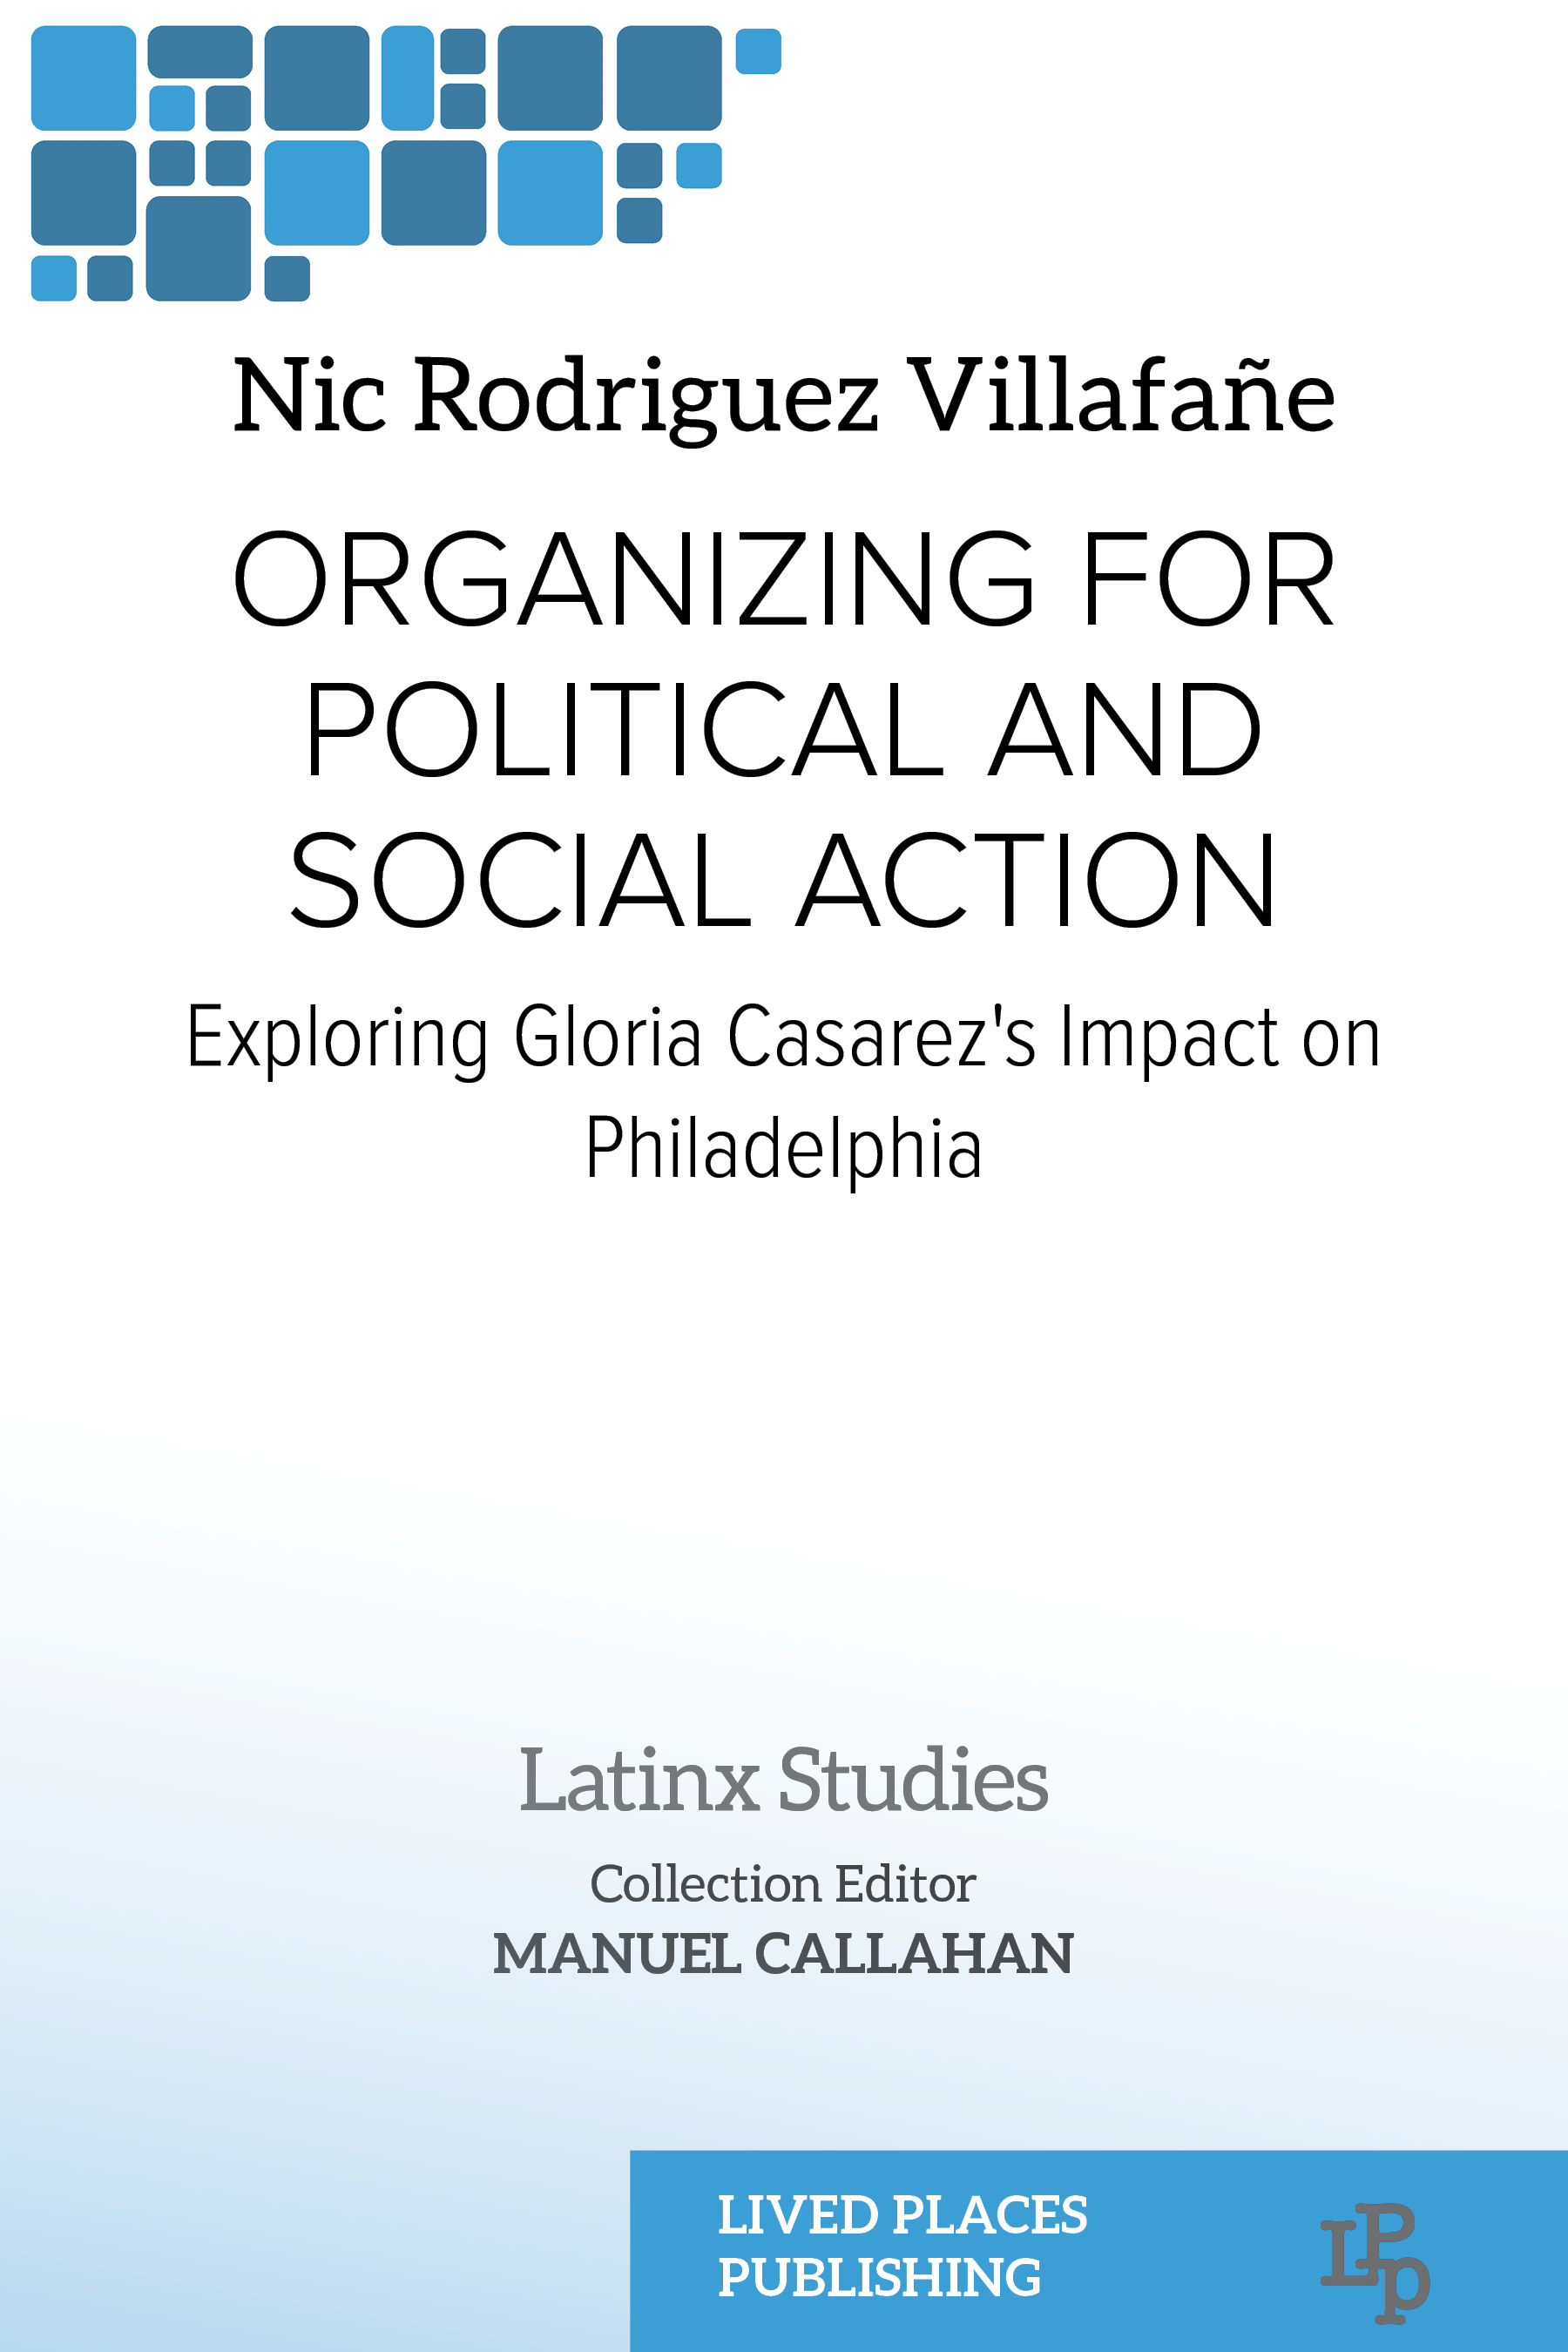 Organizing for Political and Social Action